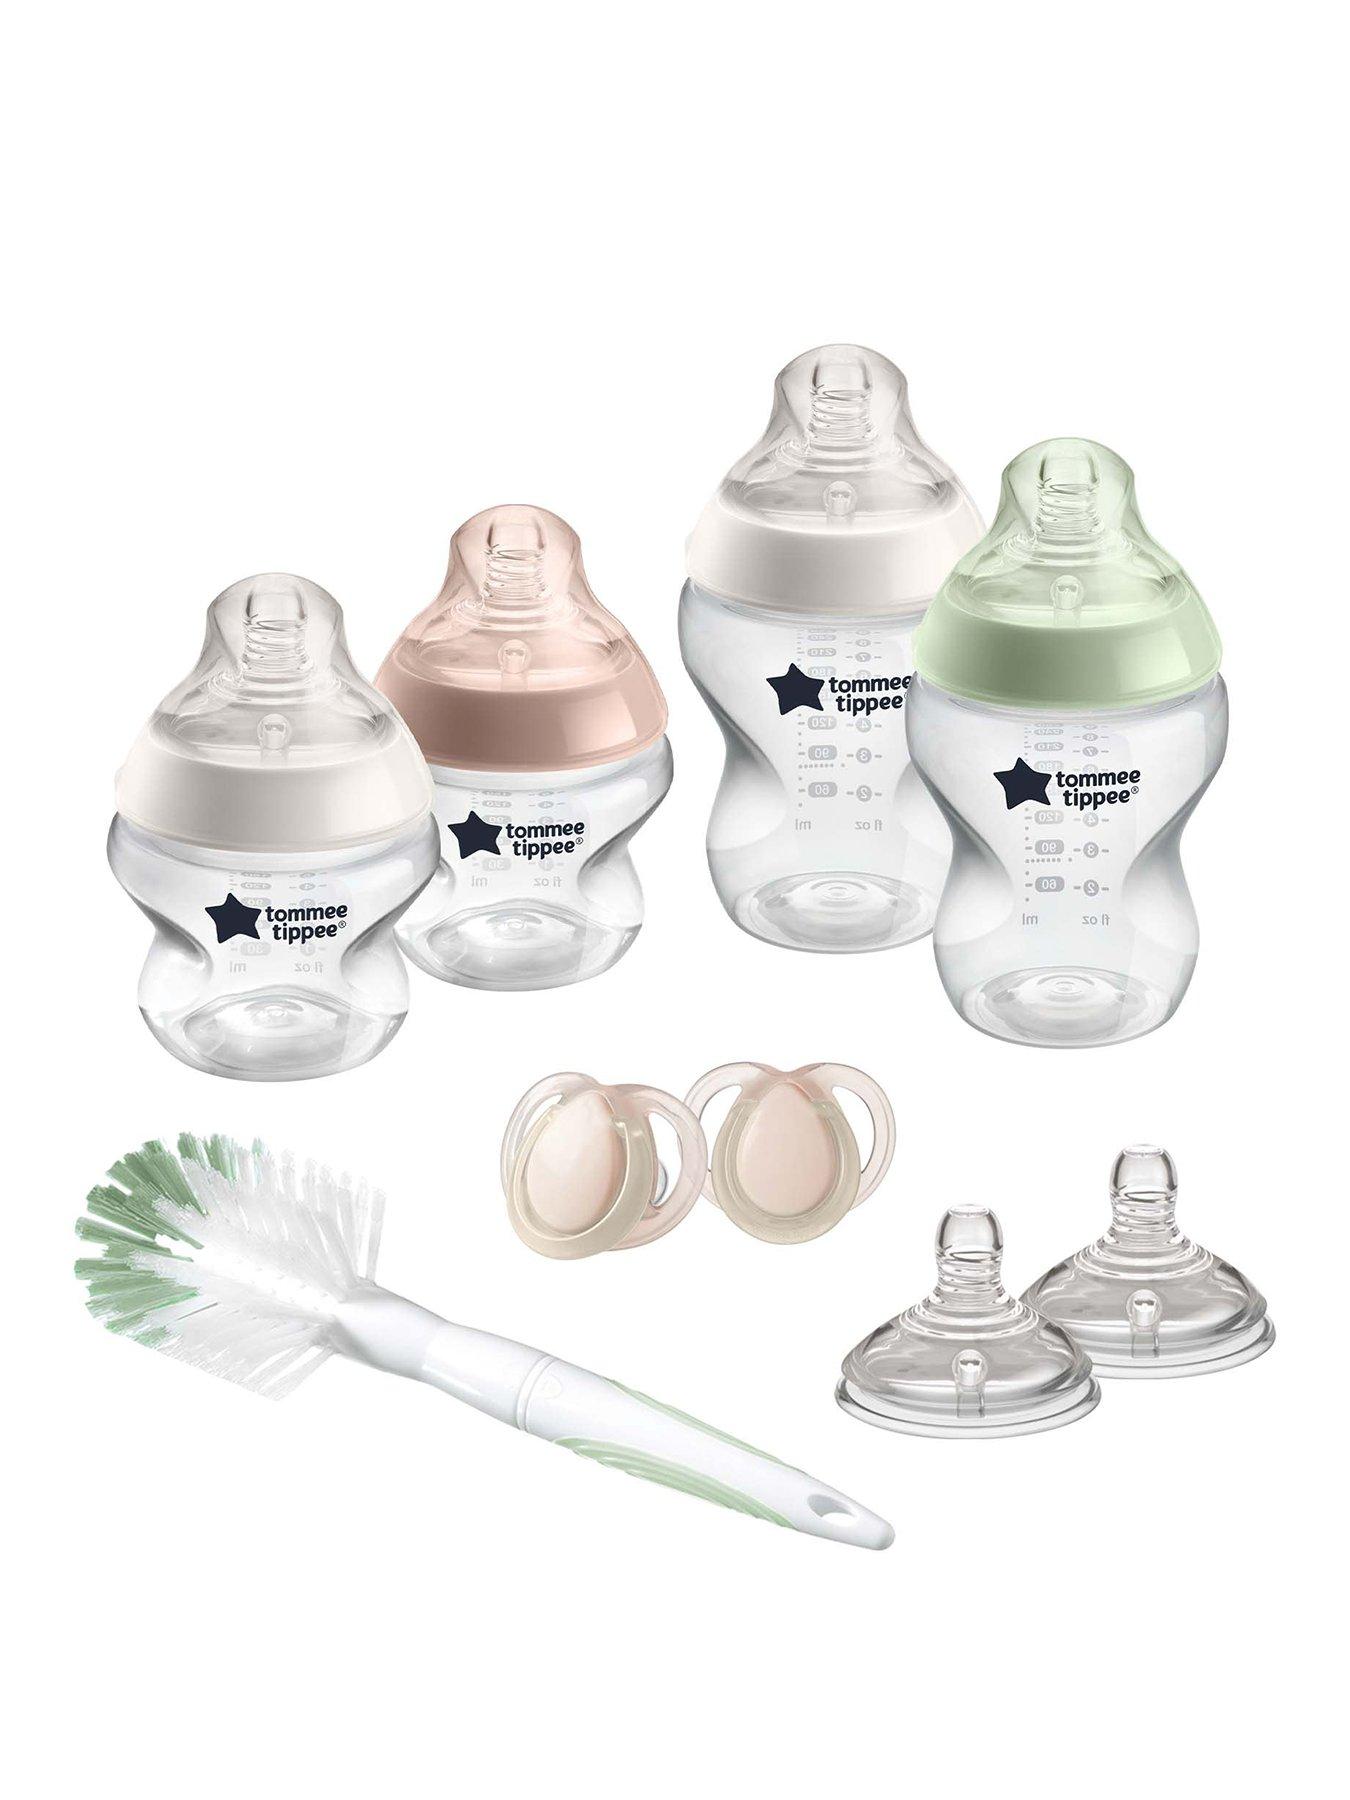 https://media.very.co.uk/i/very/VOREI_SQ2_0000000088_NO_COLOR_SLf/tommee-tippee-closer-to-nature-muted-bottle-starter-kit.jpg?$180x240_retinamobilex2$&$roundel_very$&p1_img=sale_2017